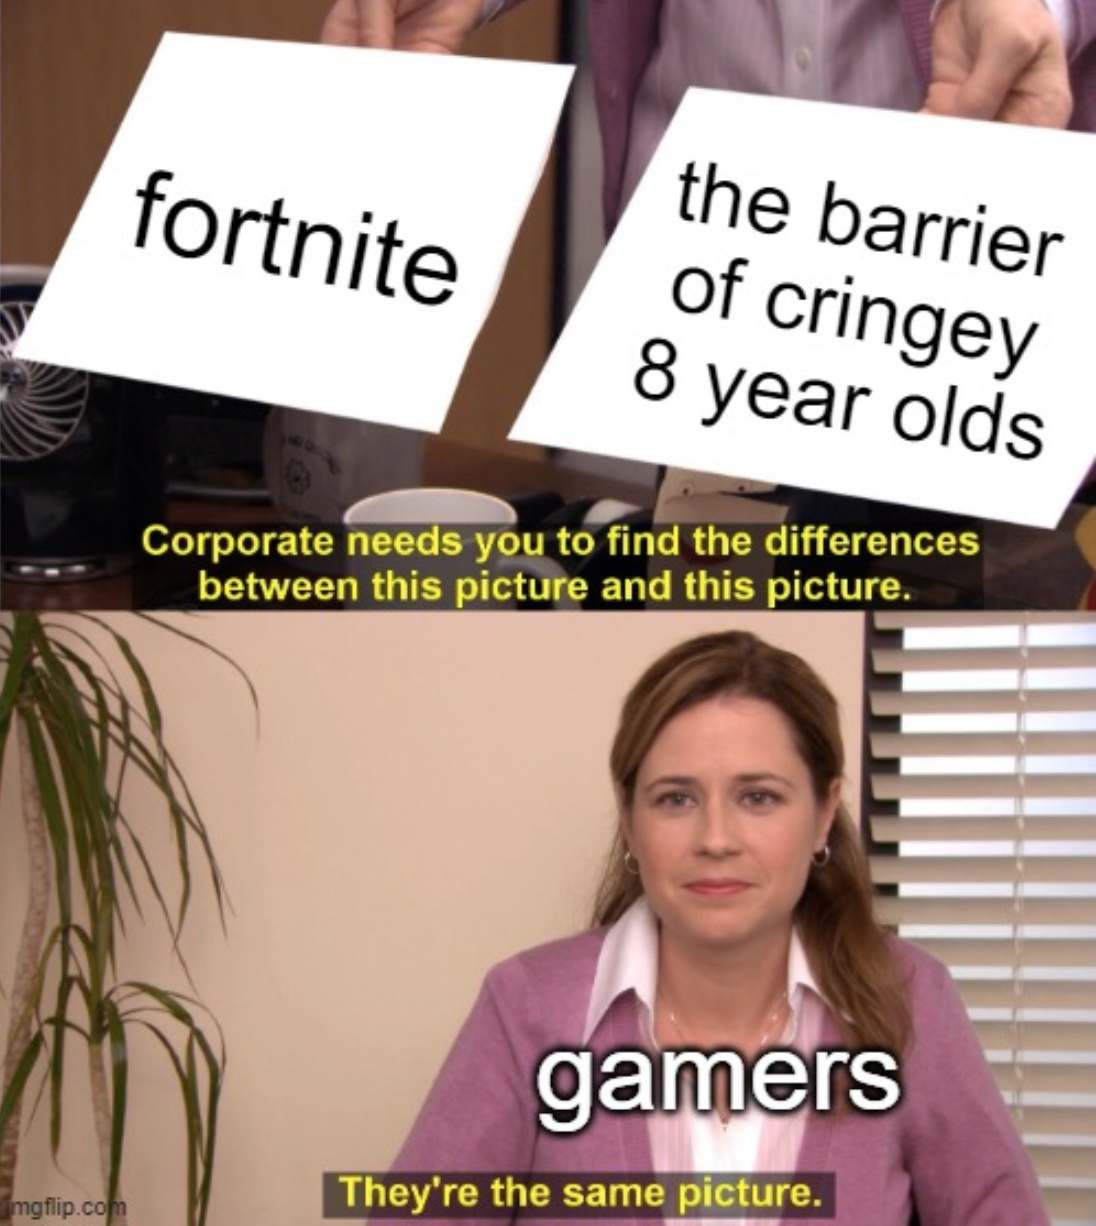 funny gaming memes  - anime sucks meme - fortnite the barrier of cringey 8 year olds Corporate needs you to find the differences between this picture and this picture. gamers mgflip.com They're the same picture.